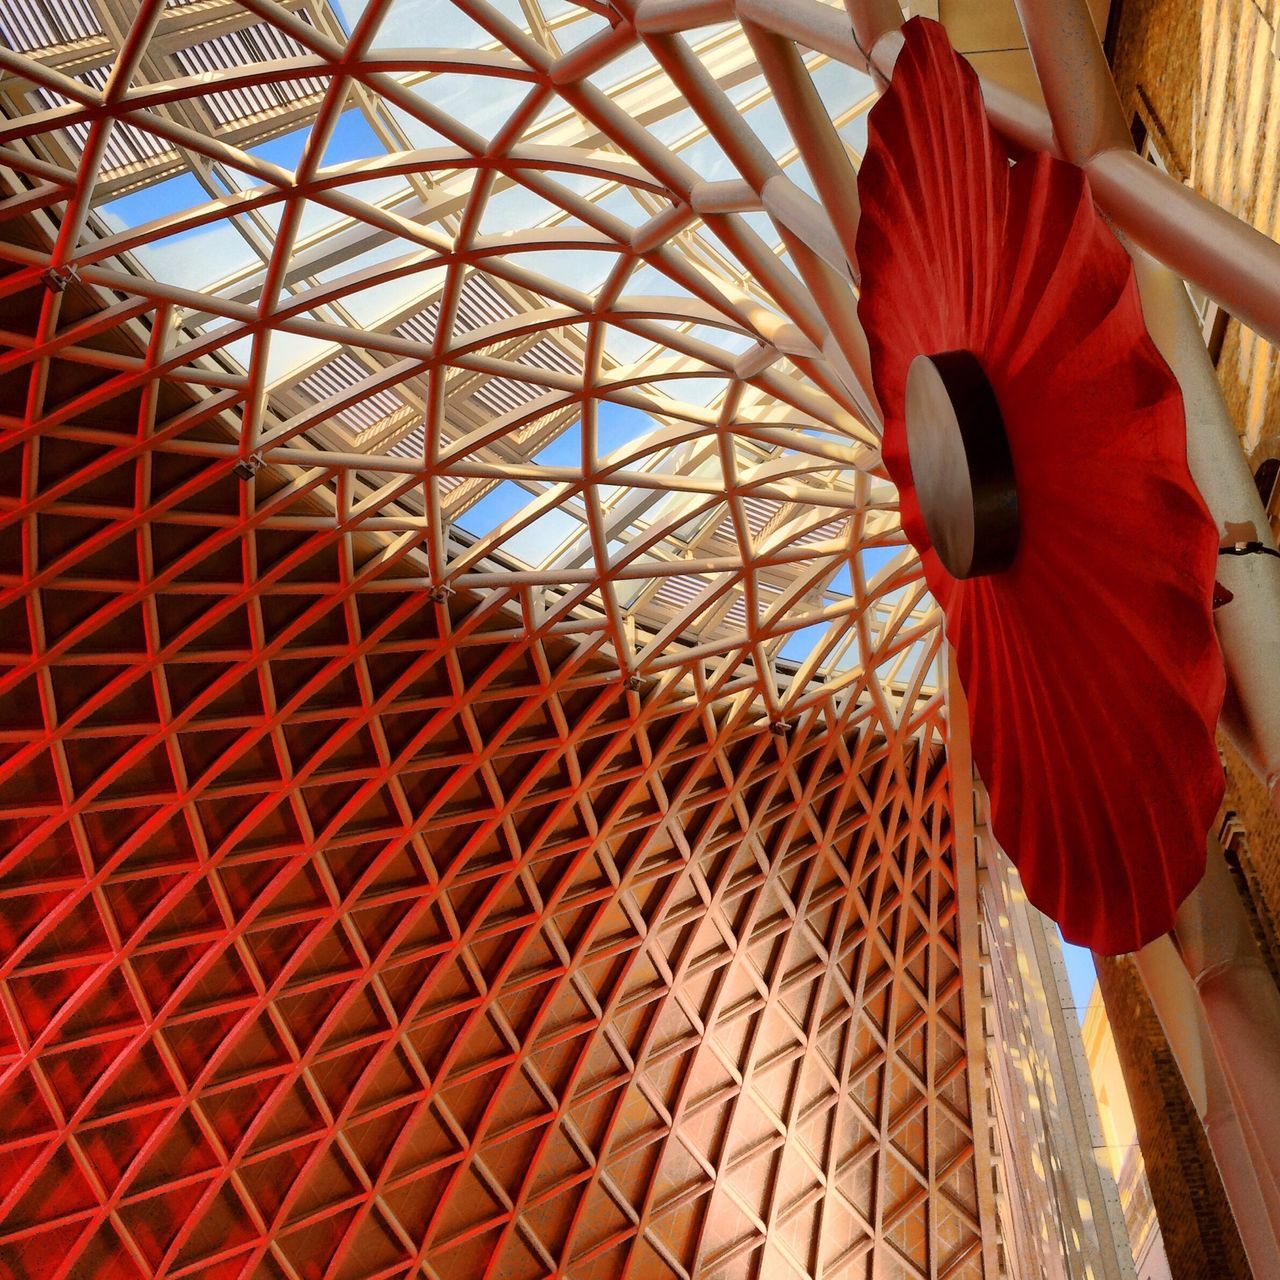 low angle view, pattern, built structure, architecture, red, design, indoors, ceiling, no people, umbrella, day, decoration, orange color, metal, arts culture and entertainment, sunlight, building exterior, multi colored, close-up